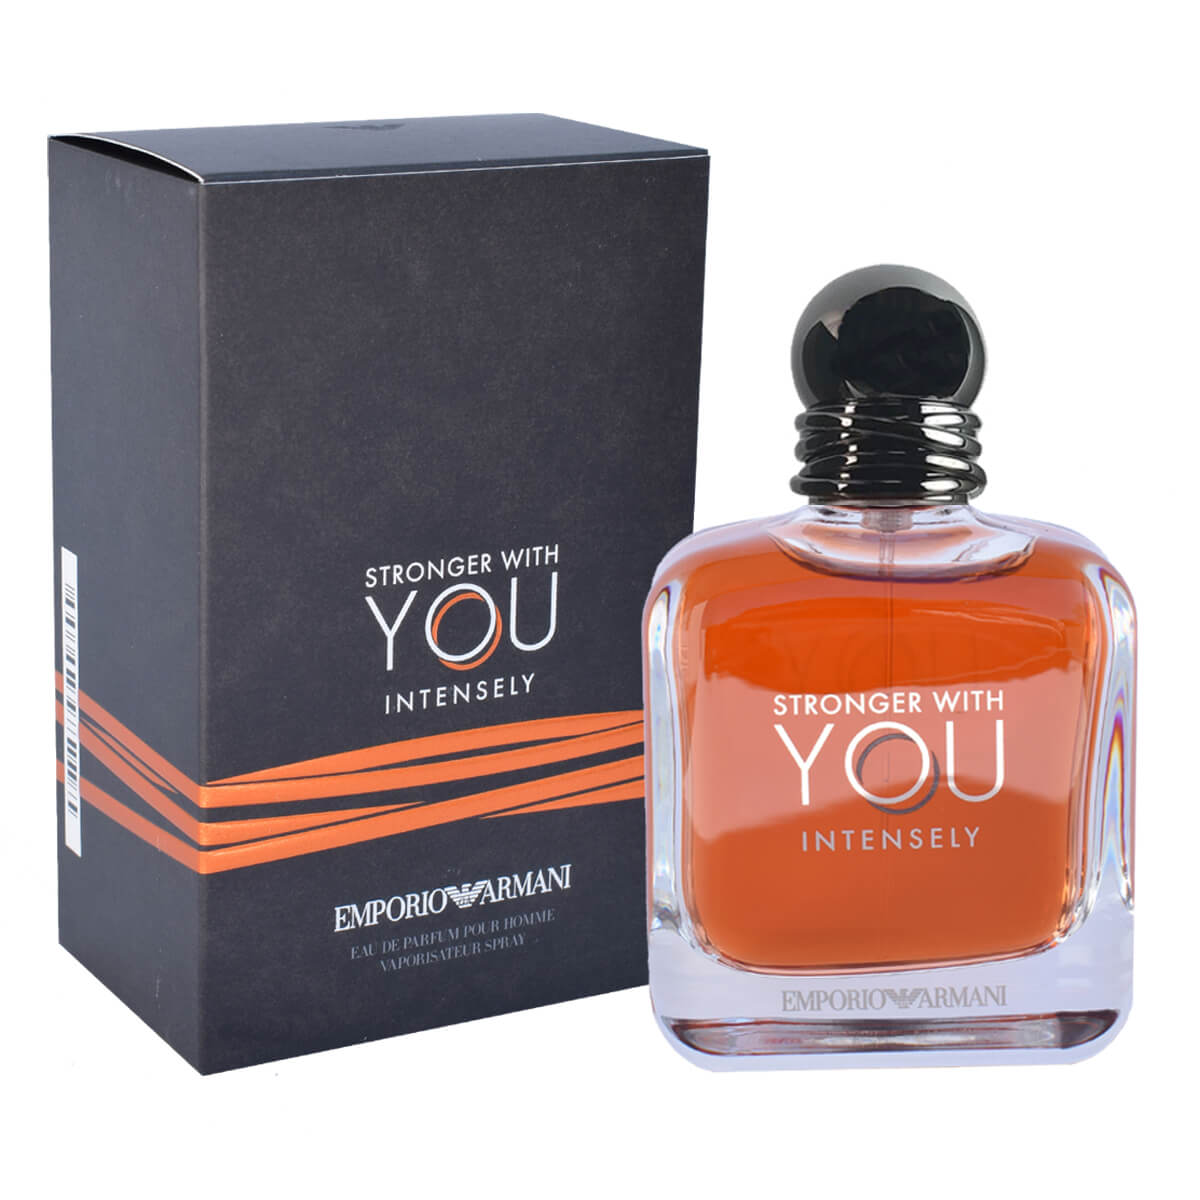 stronger with you intensely perfume